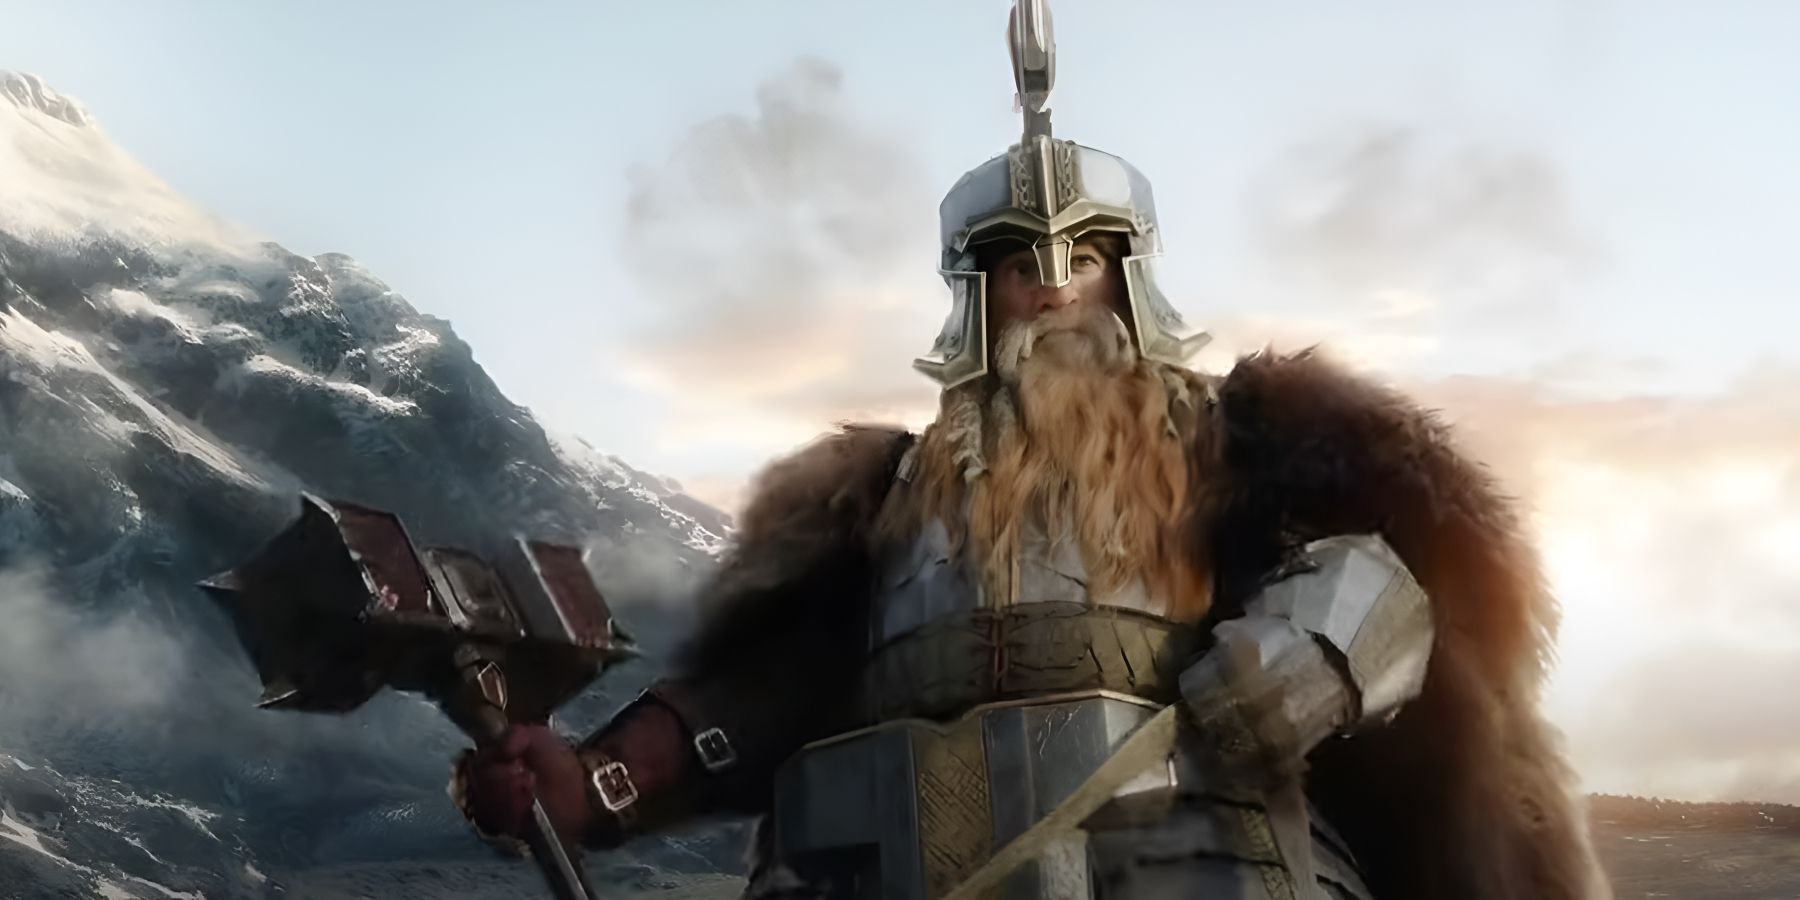 Dain II at the Battle of the Five Armies, The Hobbit